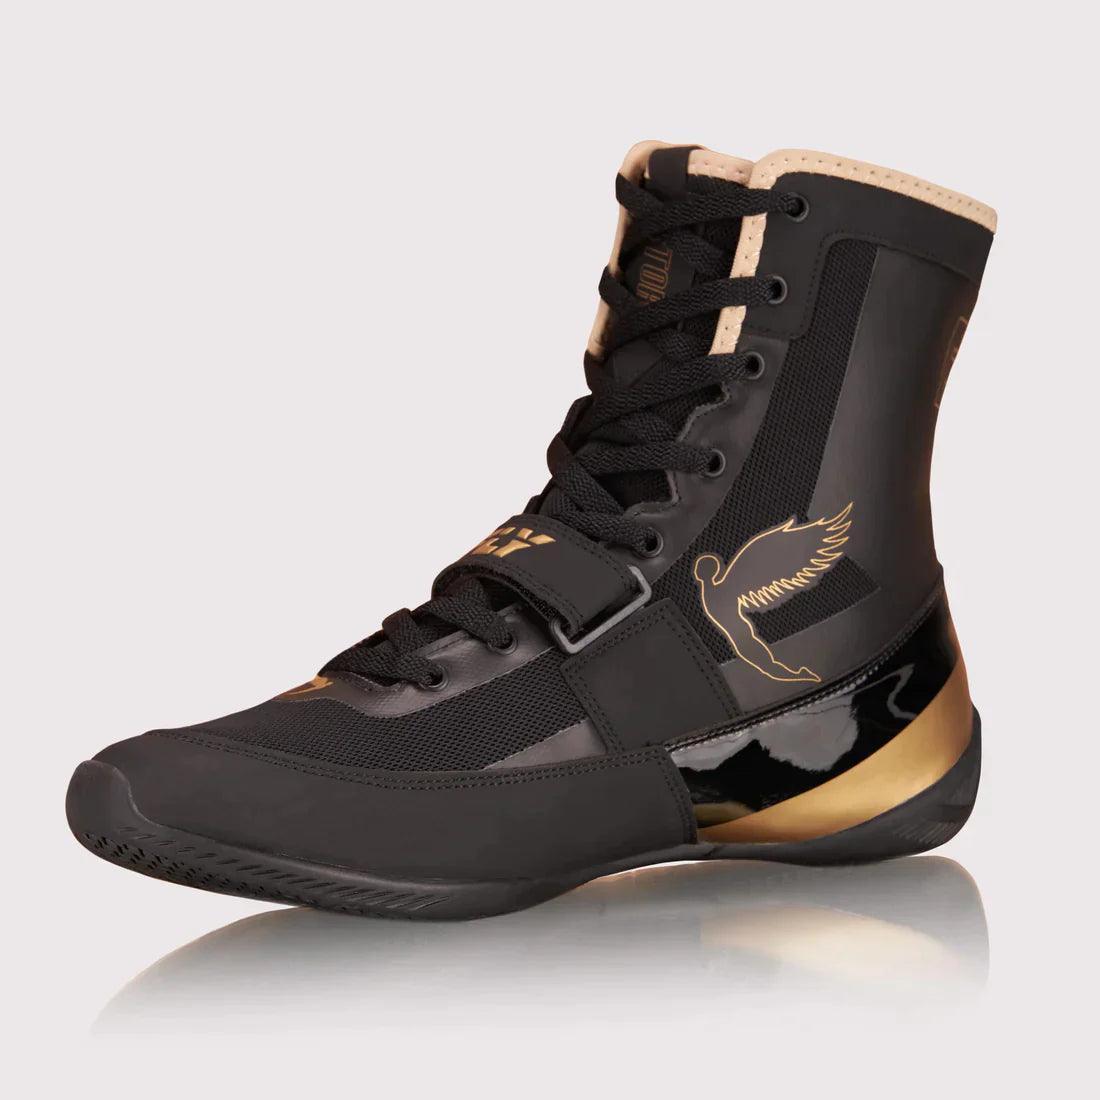 Fly Storm Kids Boxing Boots Black - RINGMASTER SPORTS - Made For Champions